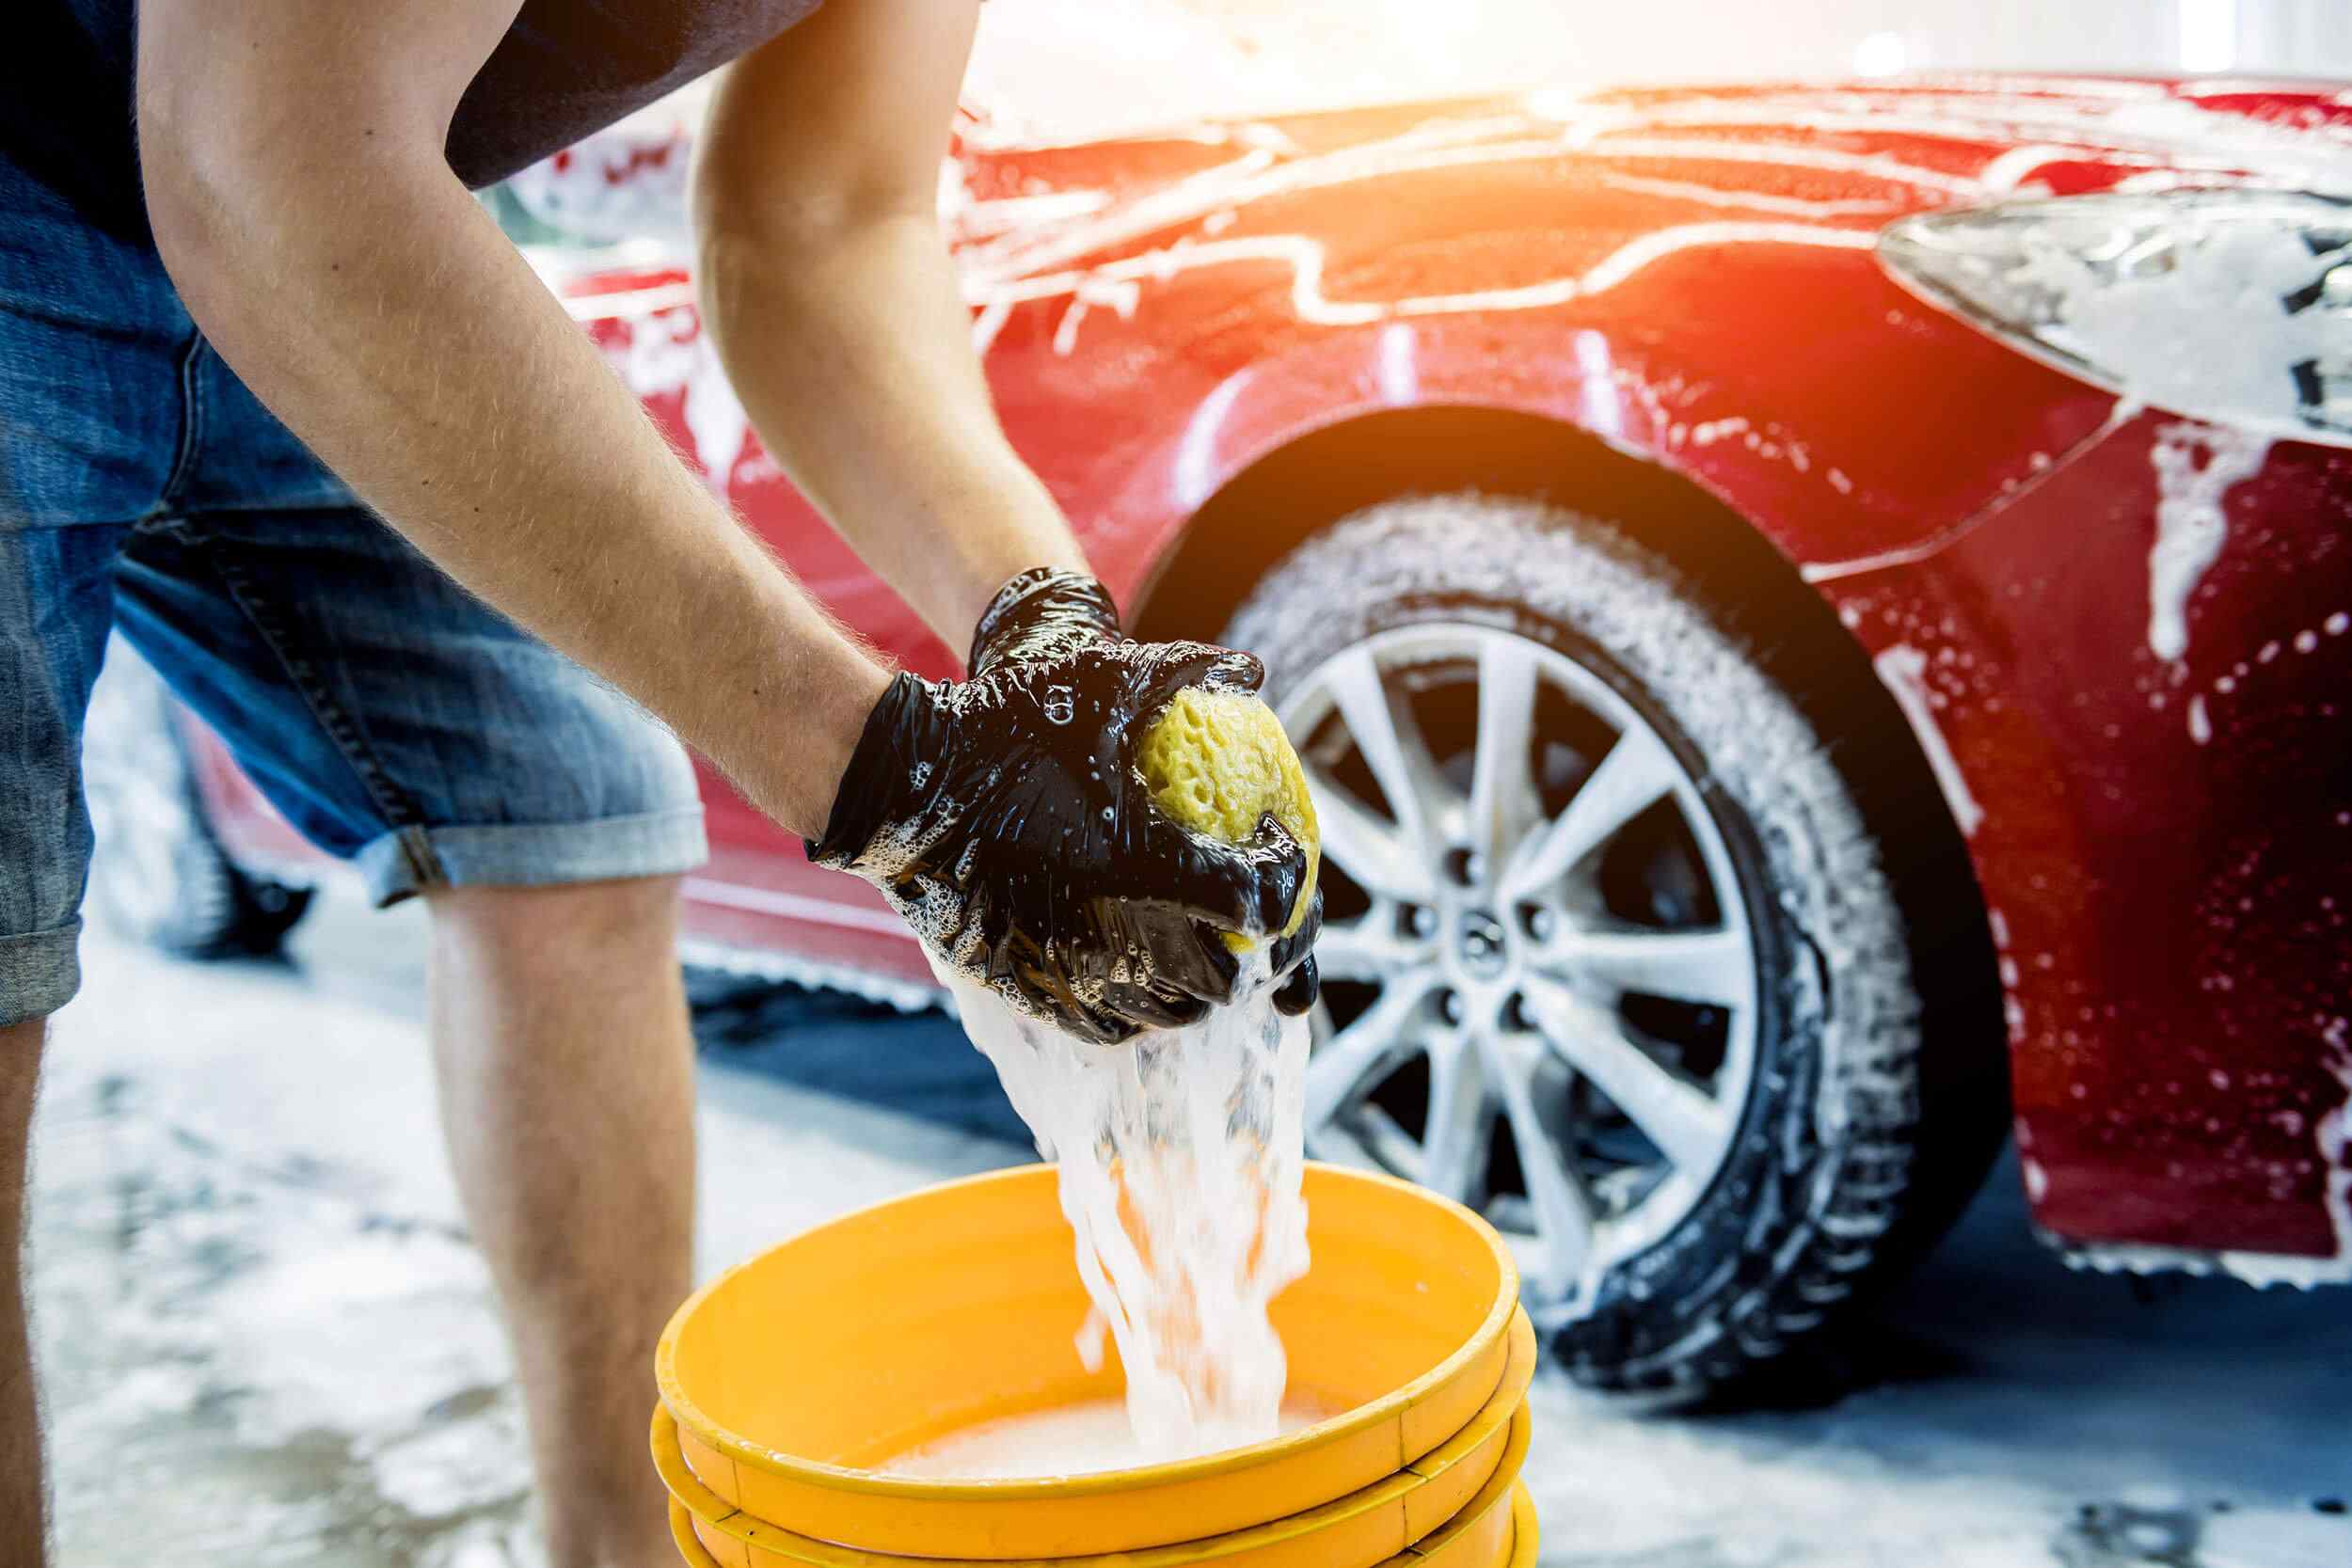 Deluxe Car Detailing, Duluth MN Car Detail Service